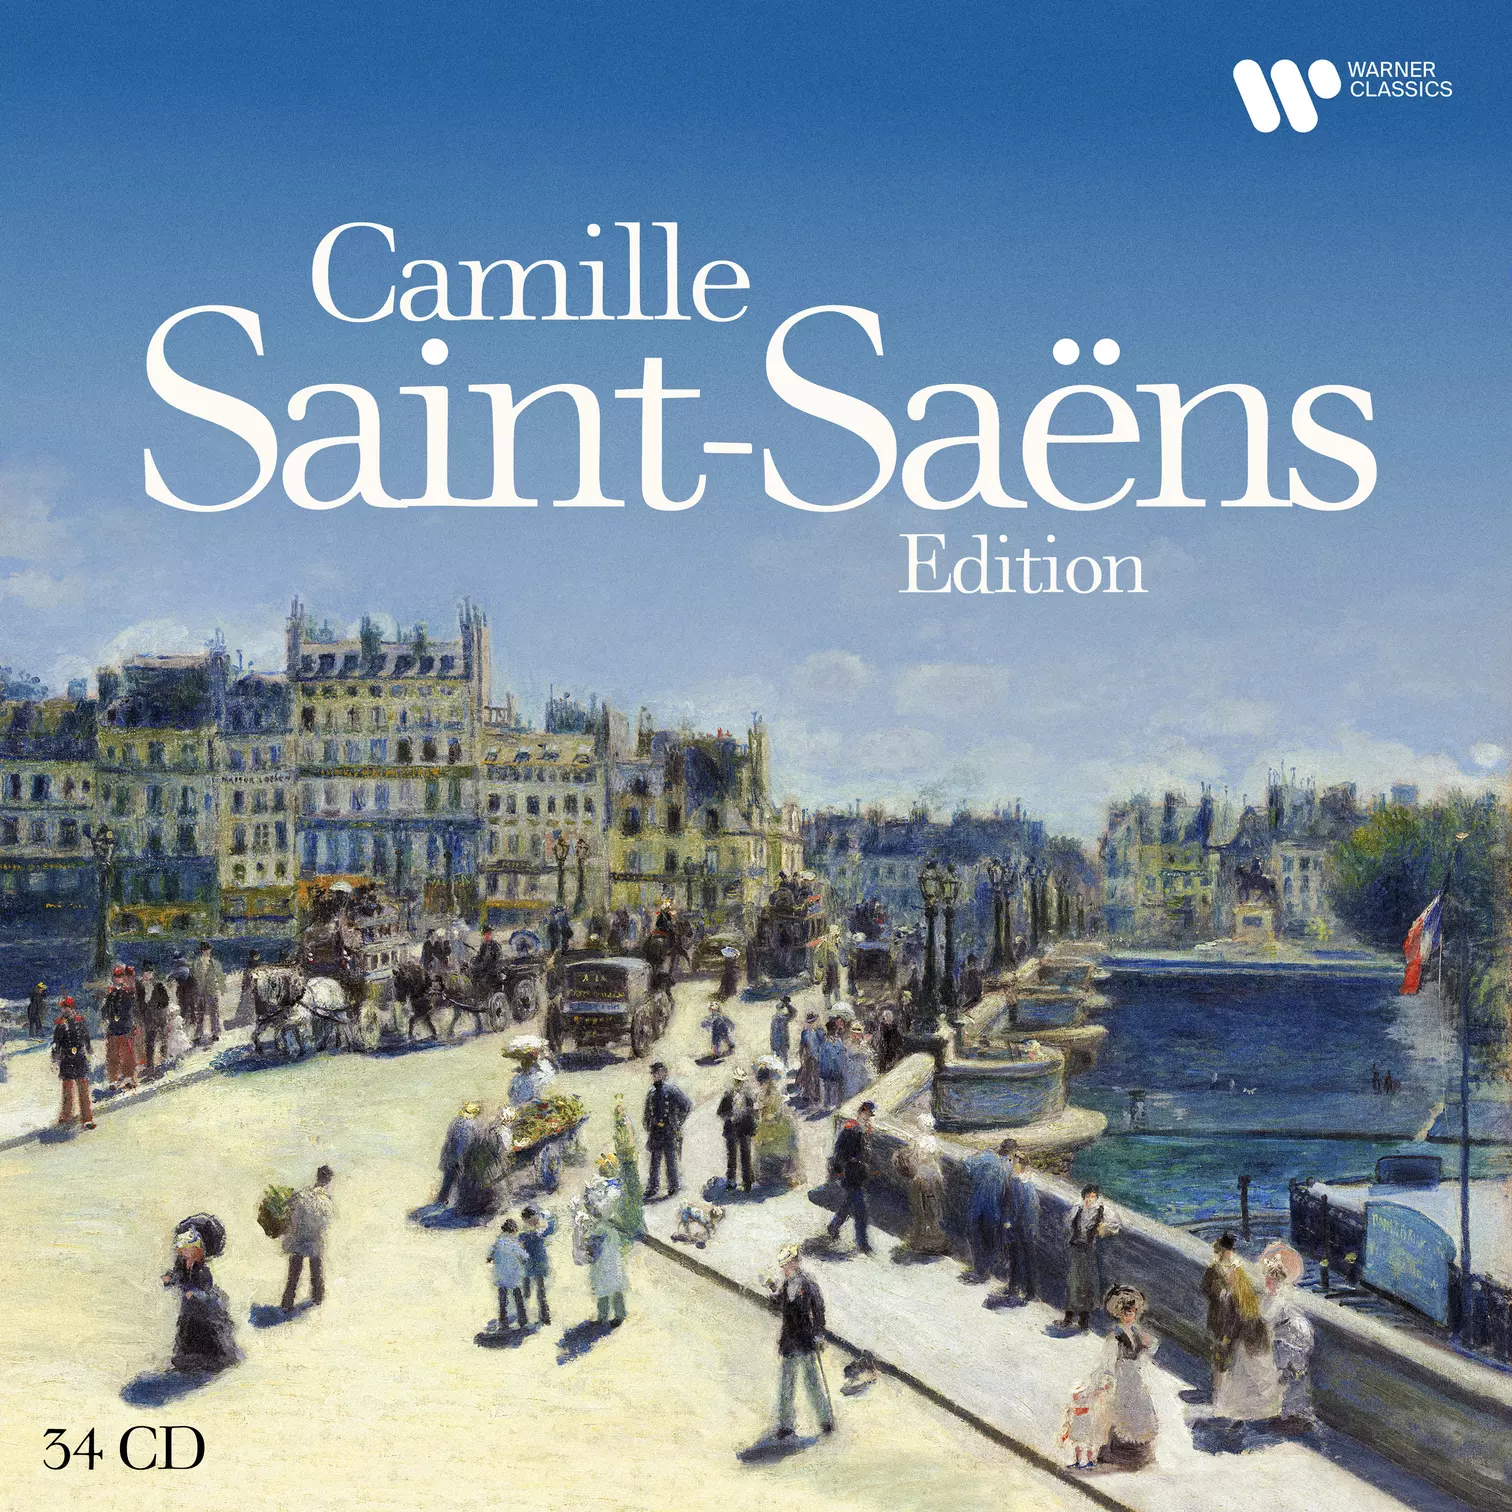 Yhe Life and Music of Camille Saint-Saens, Exploring Music